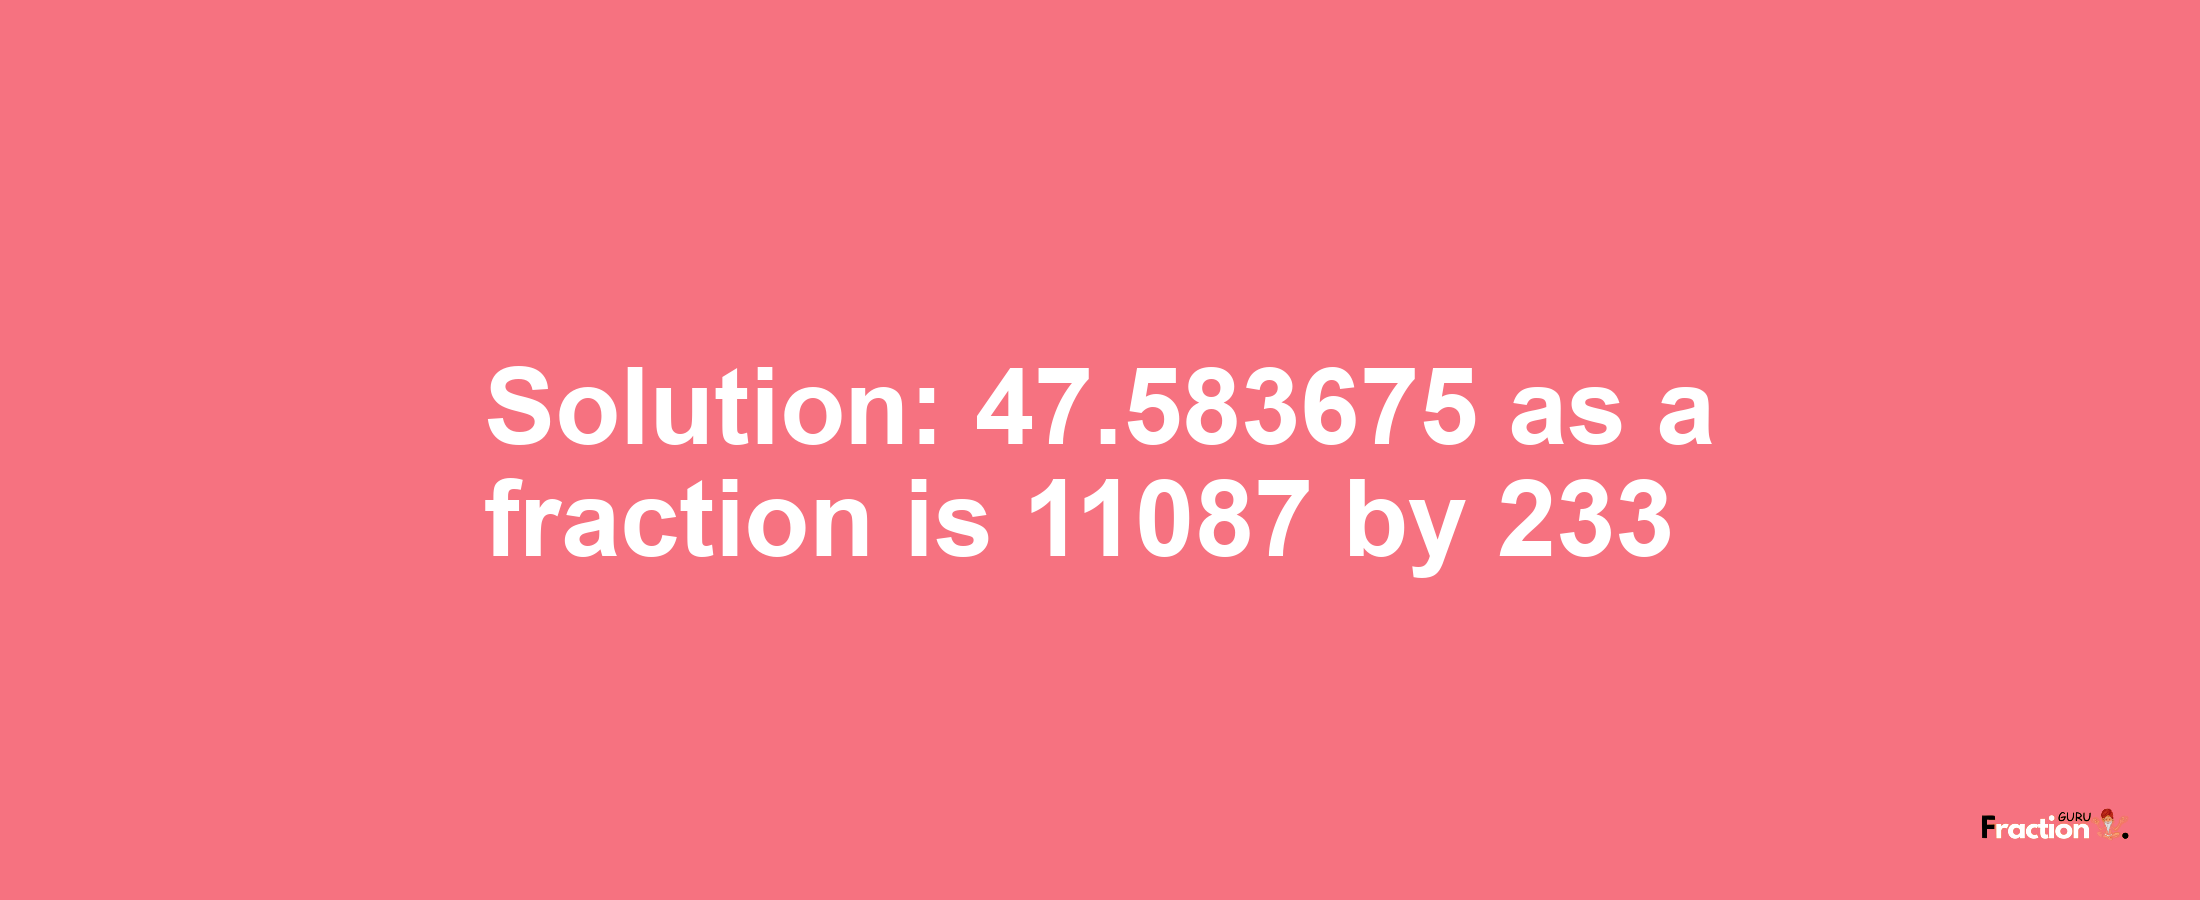 Solution:47.583675 as a fraction is 11087/233